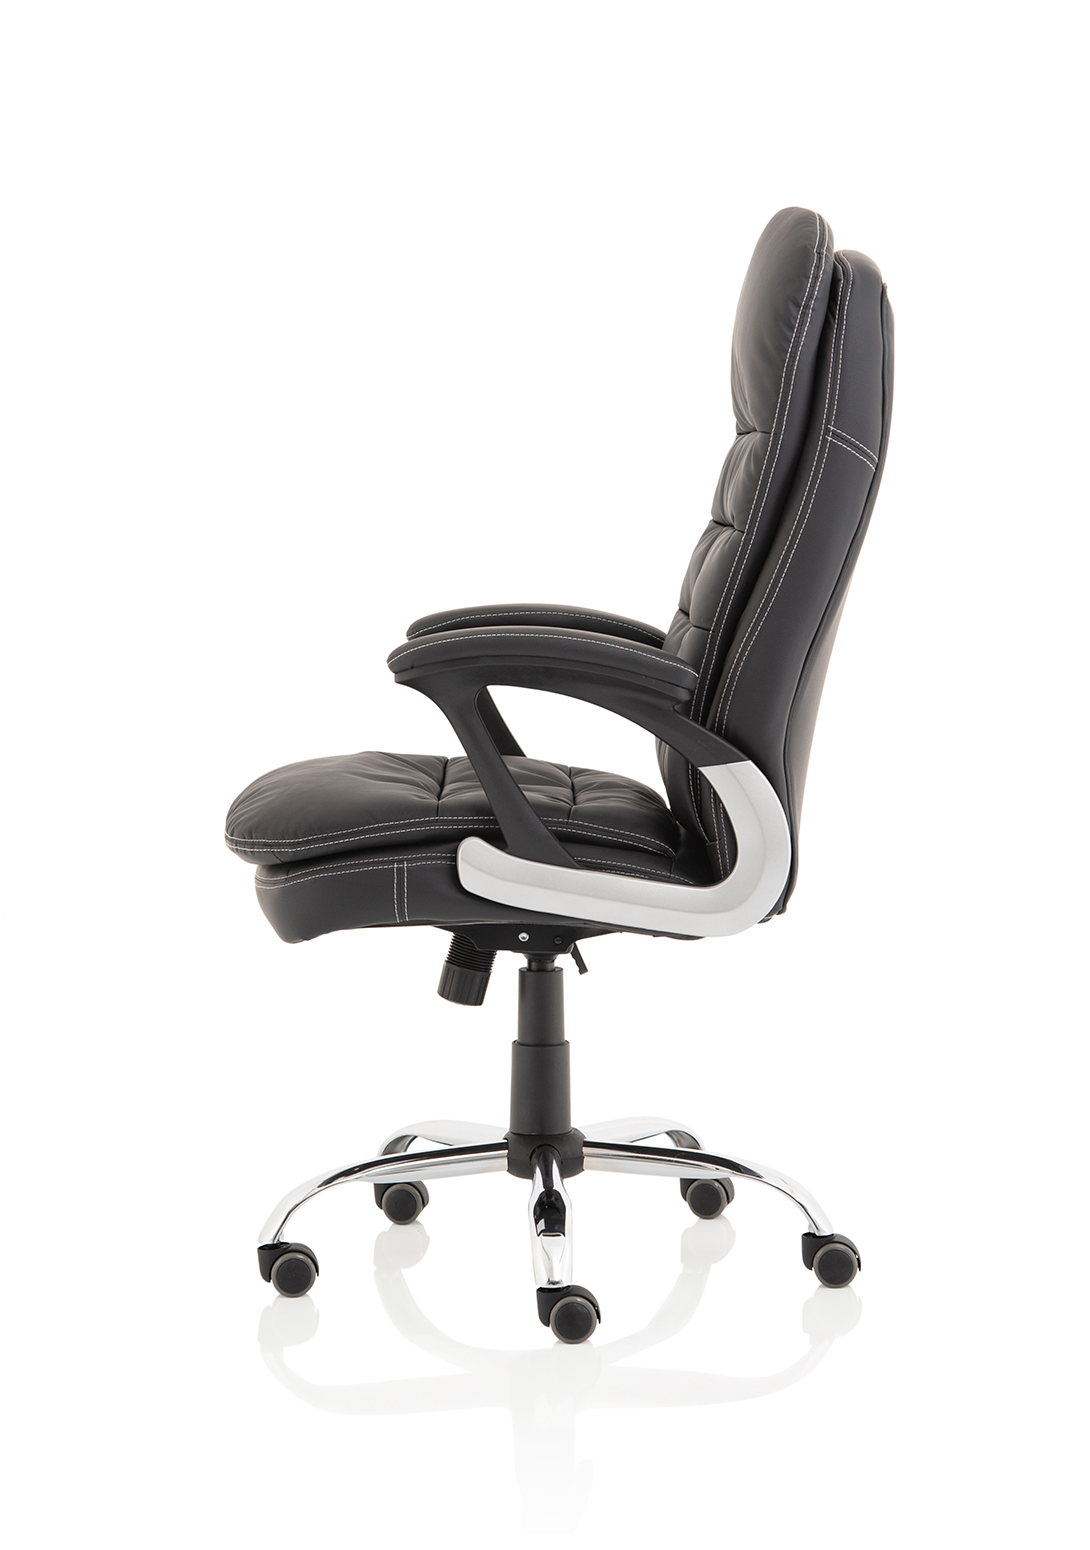 Ontario High Back Executive Office Chair with Arms